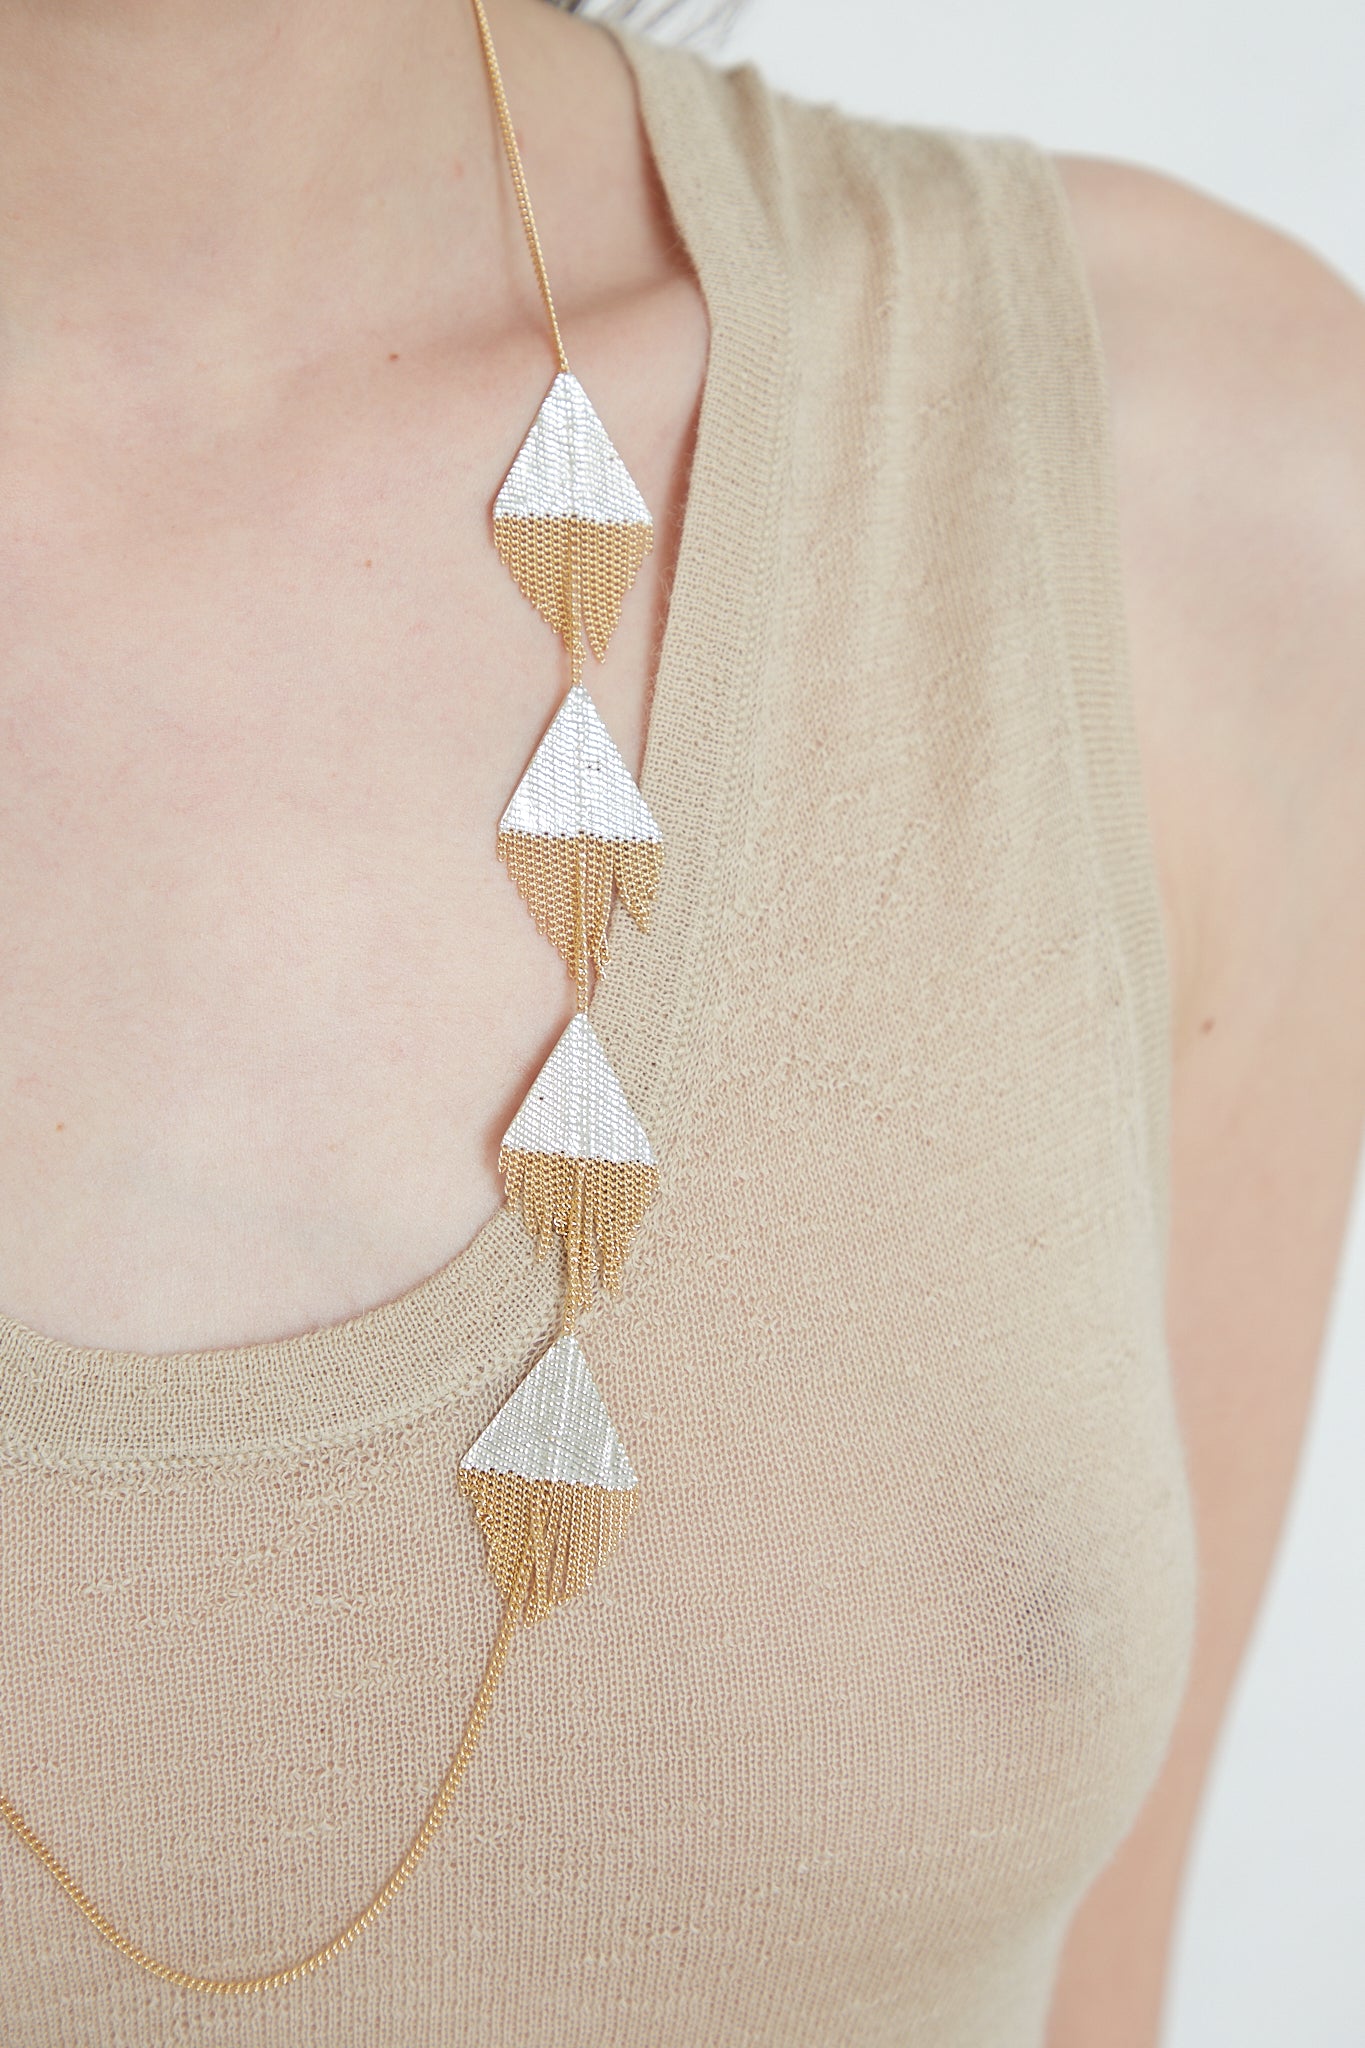 A Hannah Keefe Triangle Necklace in Brass Chain and Silver Solder featuring delicate triangles crafted from brass and silver solder.